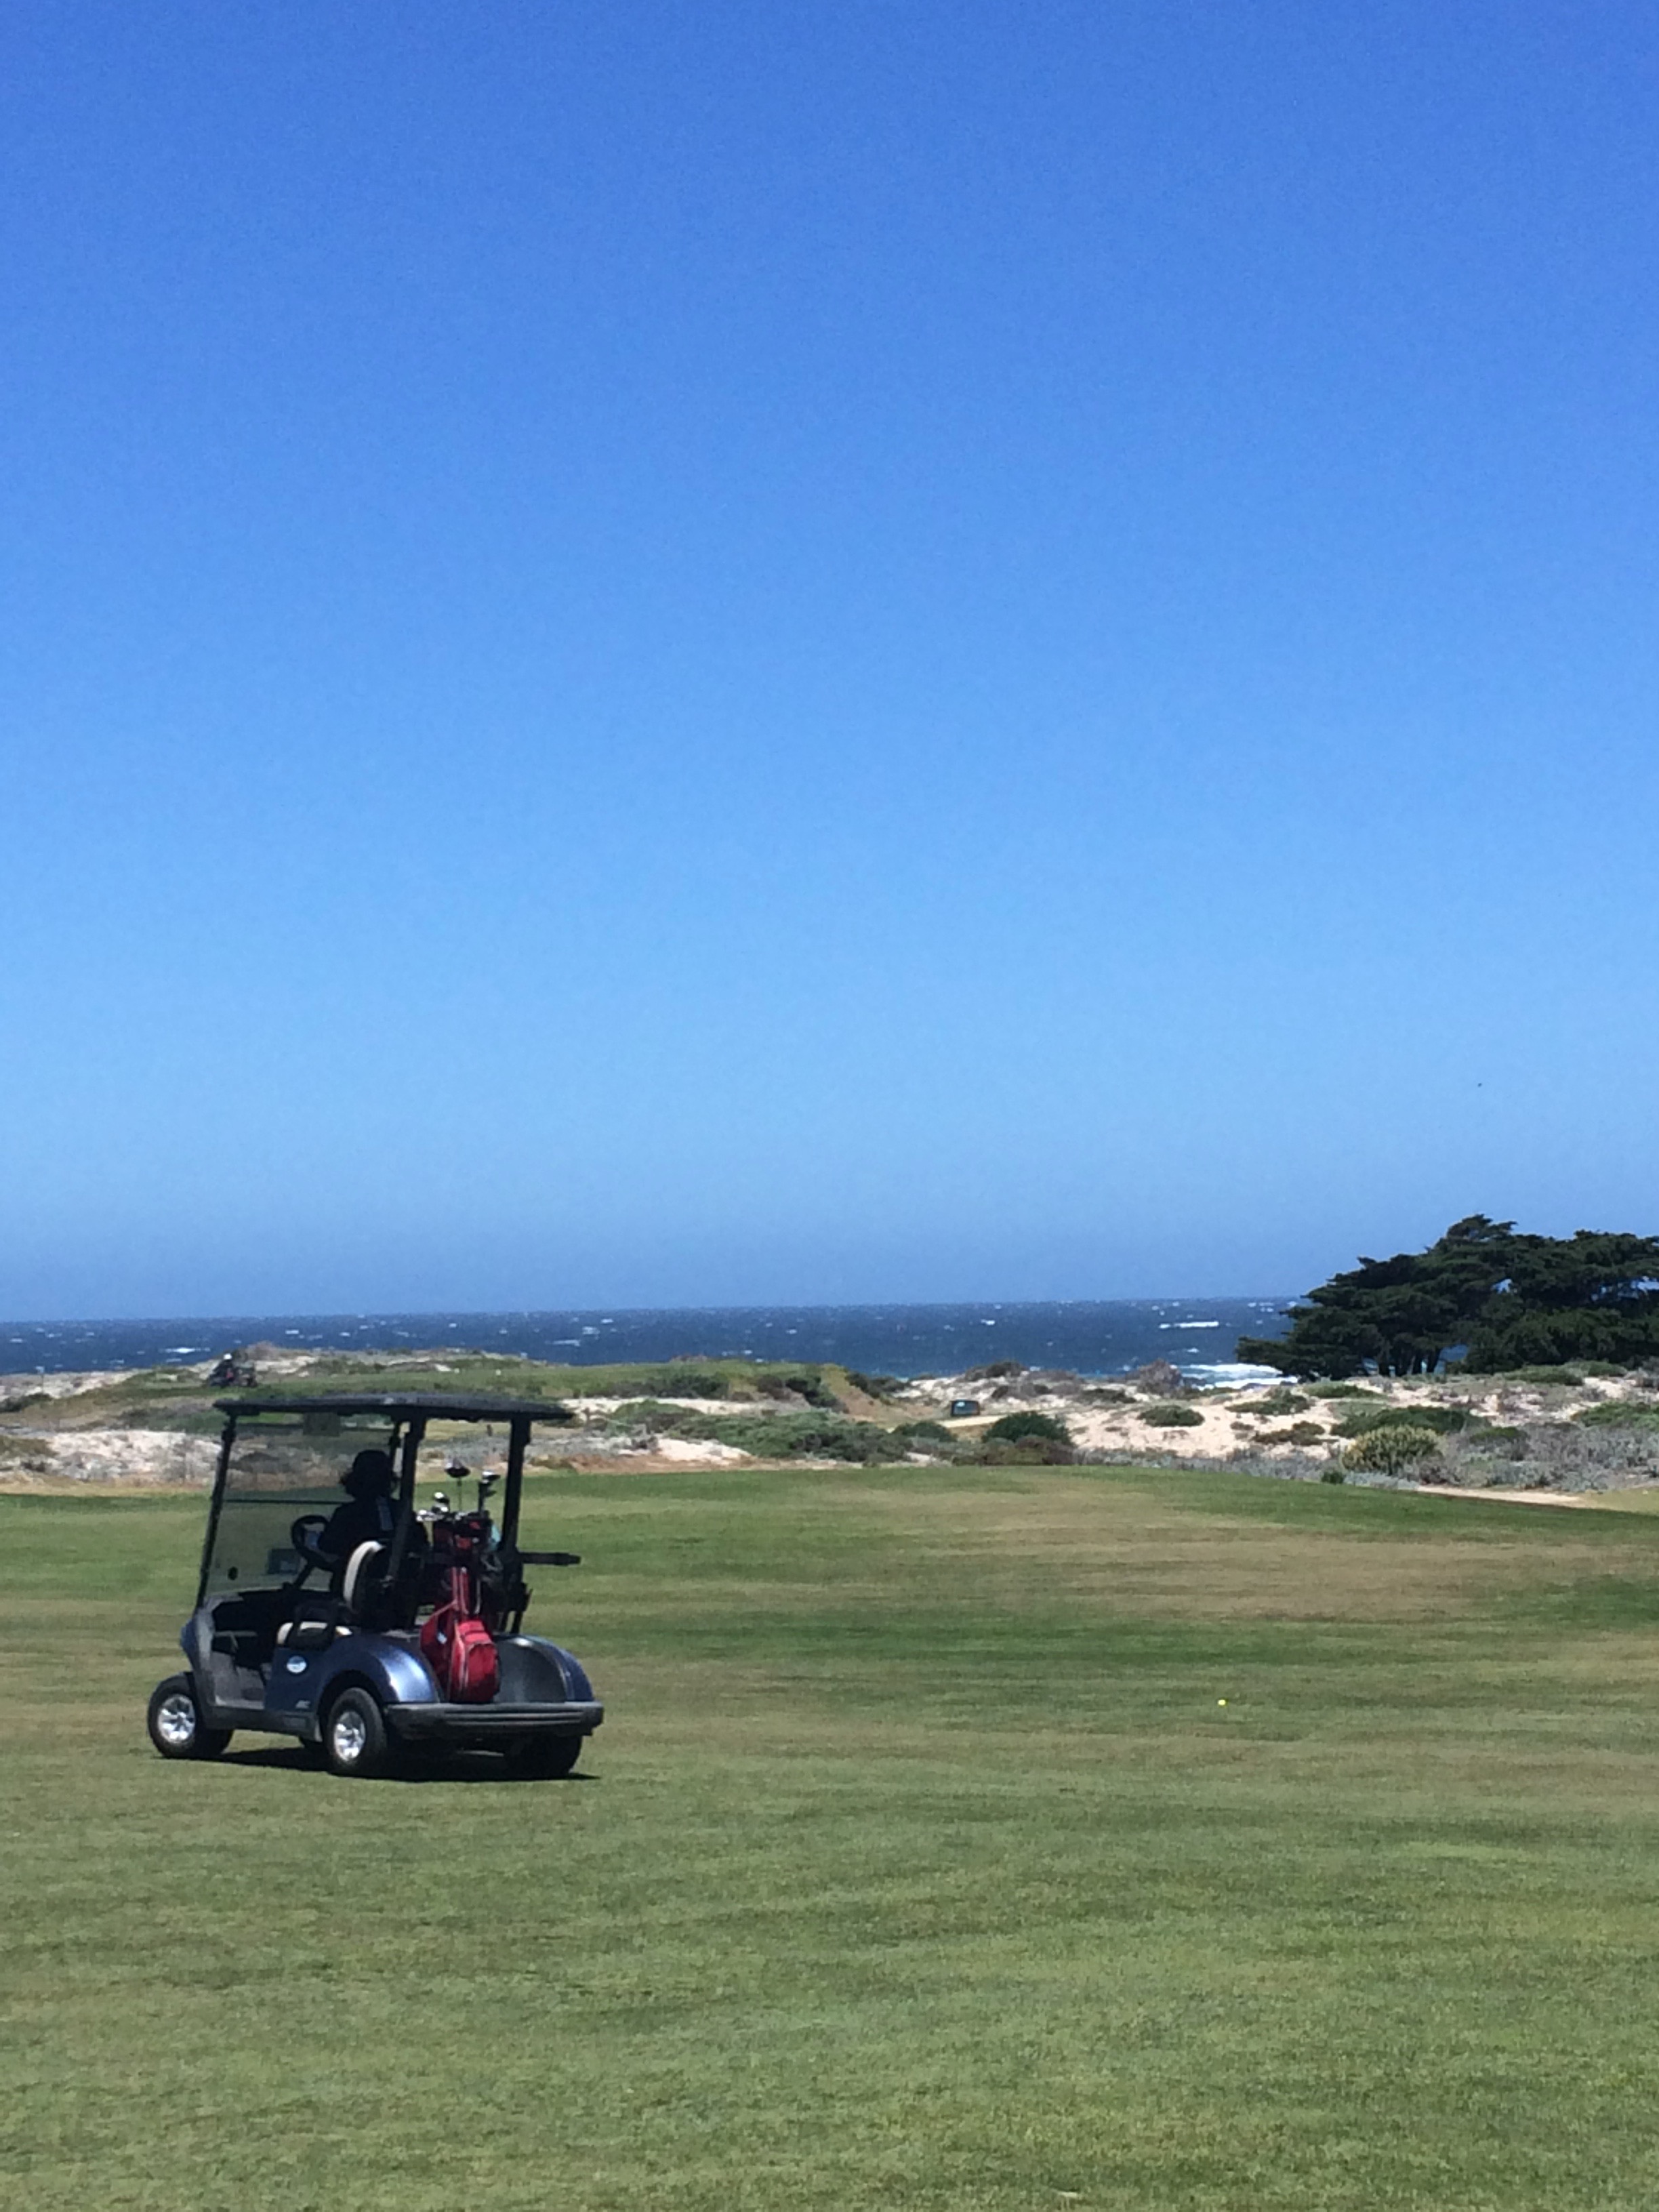 Image of golf cart on fairway, ocean in the background